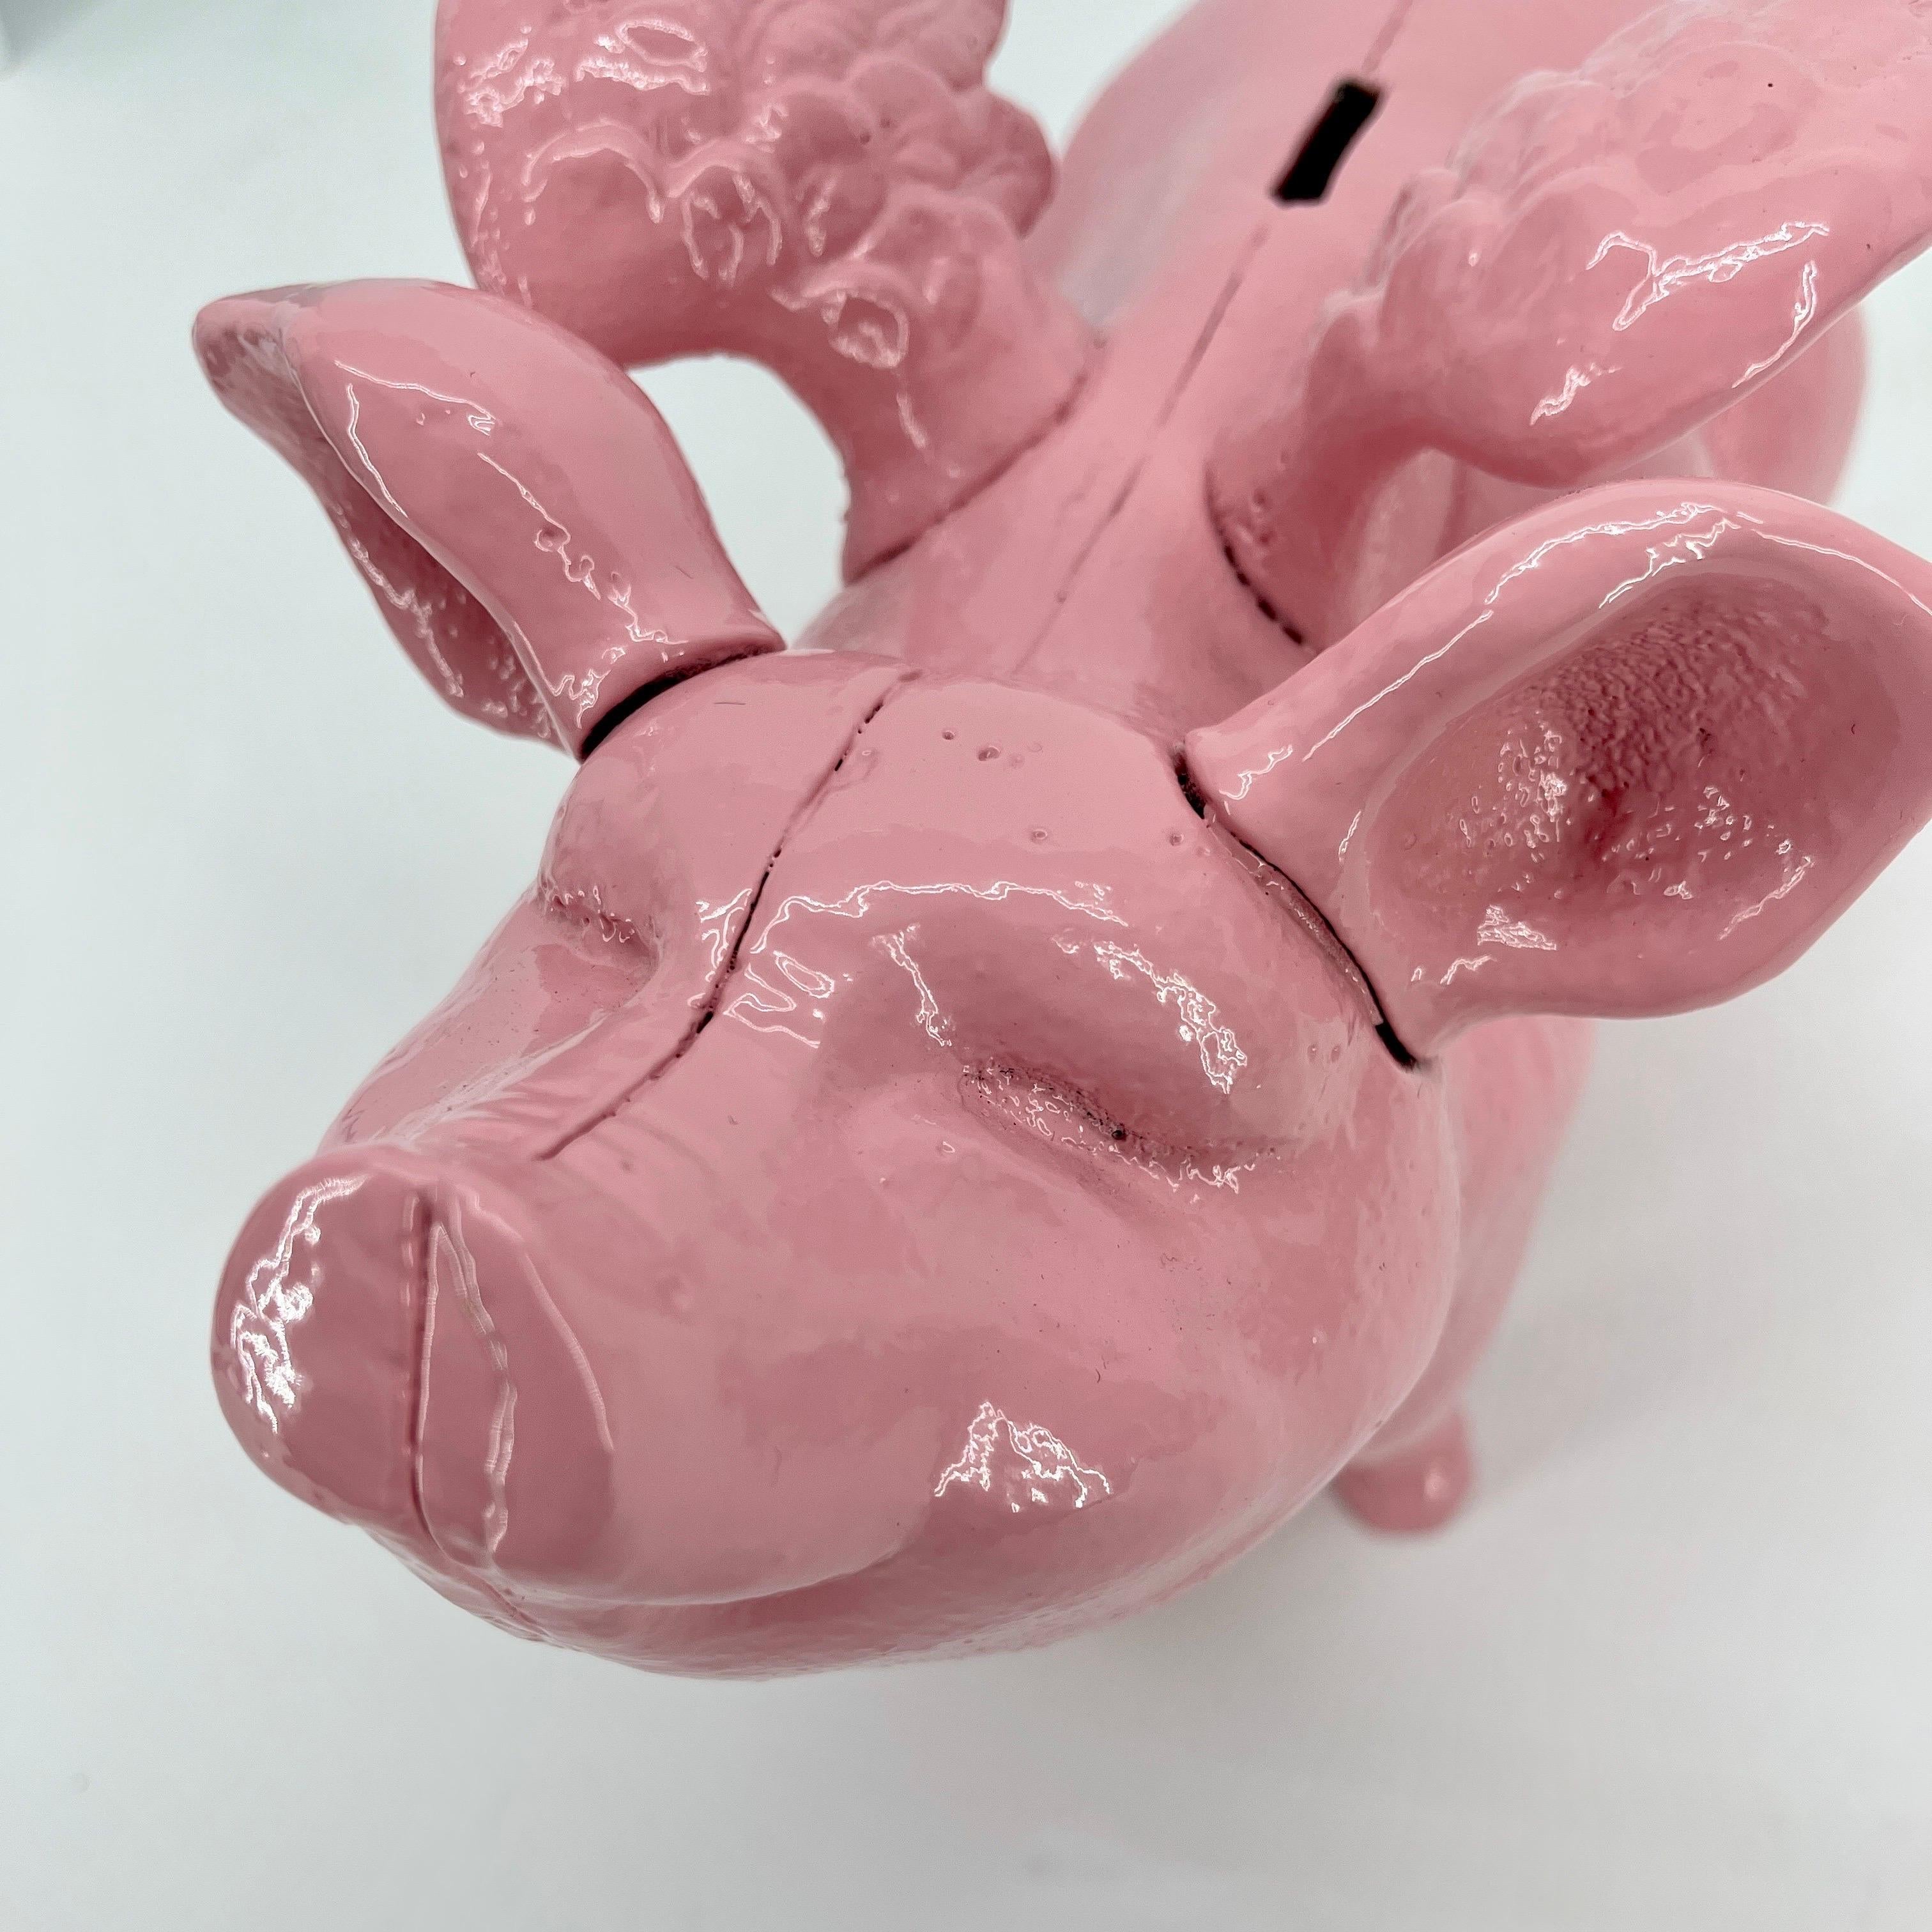 Large Pink Cast Iron Pig Money Bank or Doorstop with Wings, Denmark 5